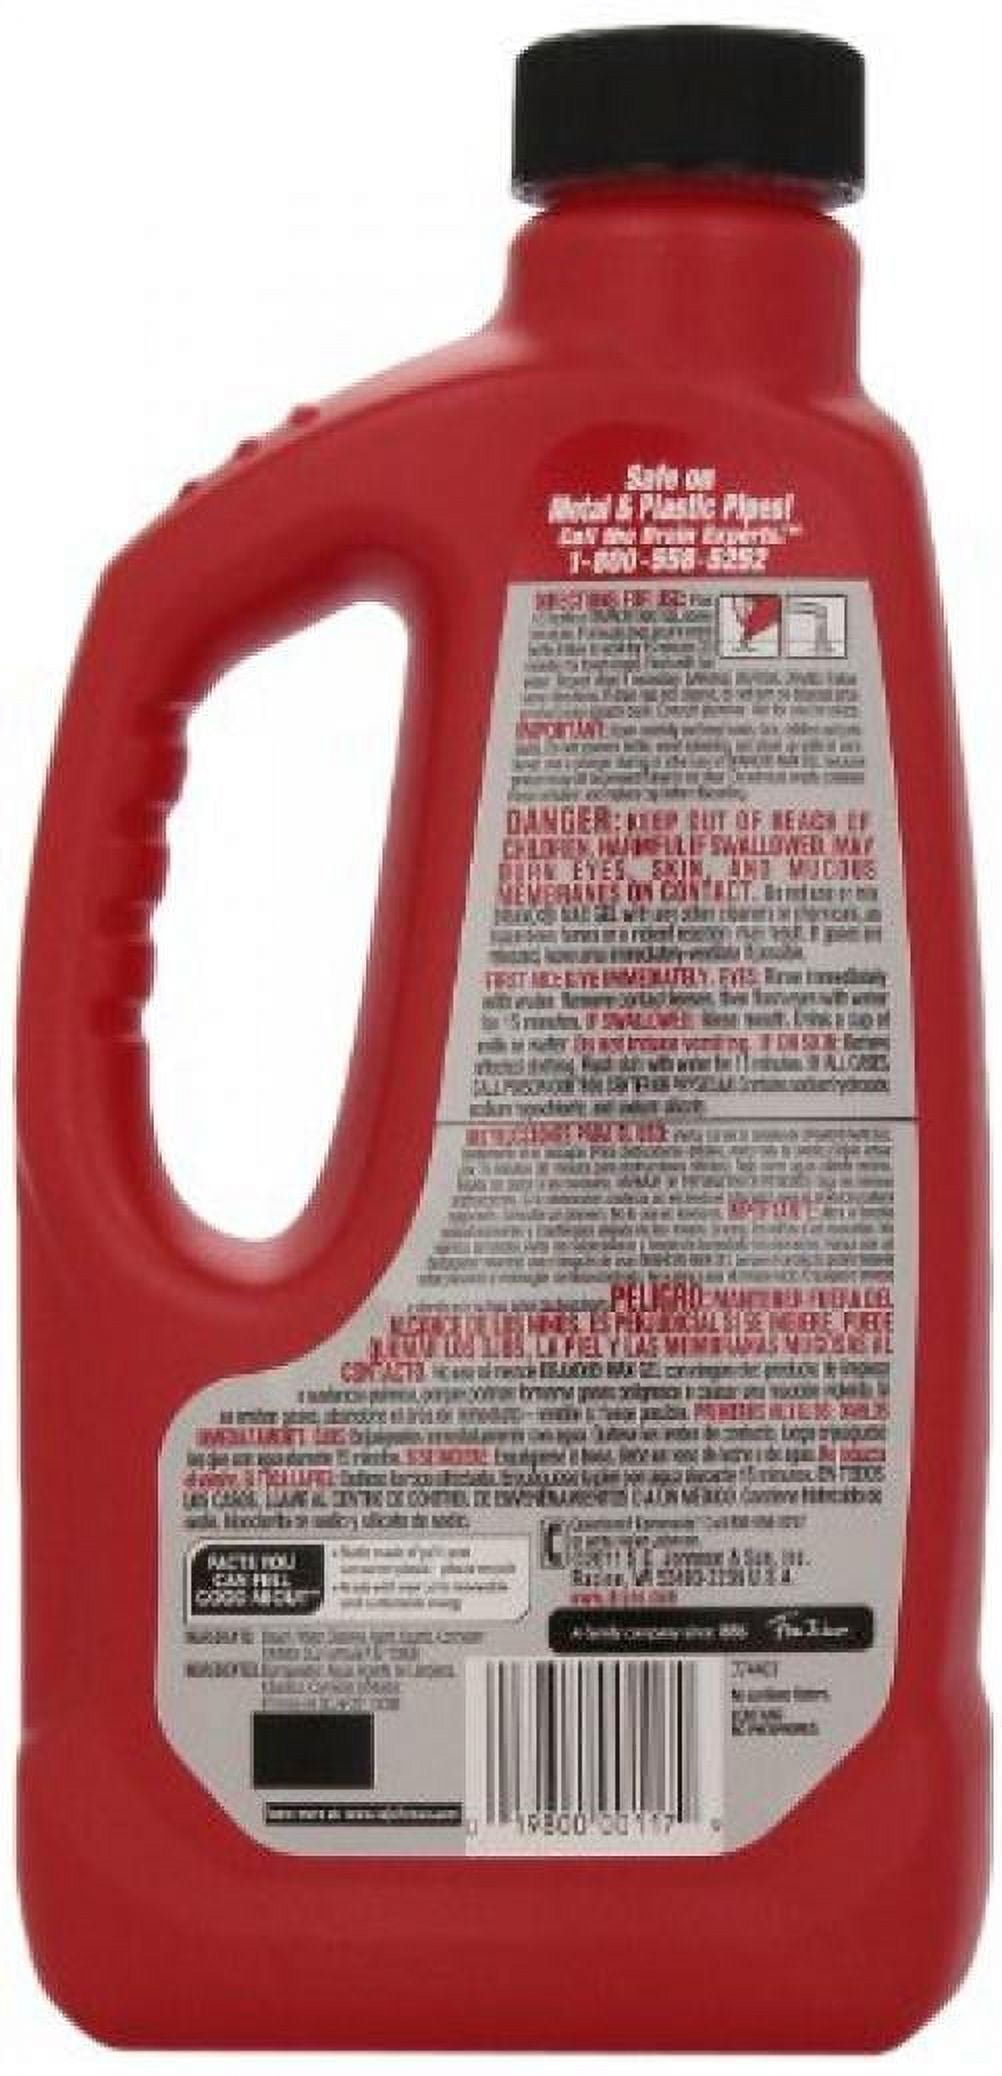 Drano 00233 Hair Clog Remover: Drain Opener Chemicals & Power Charges  (019800002336-1)